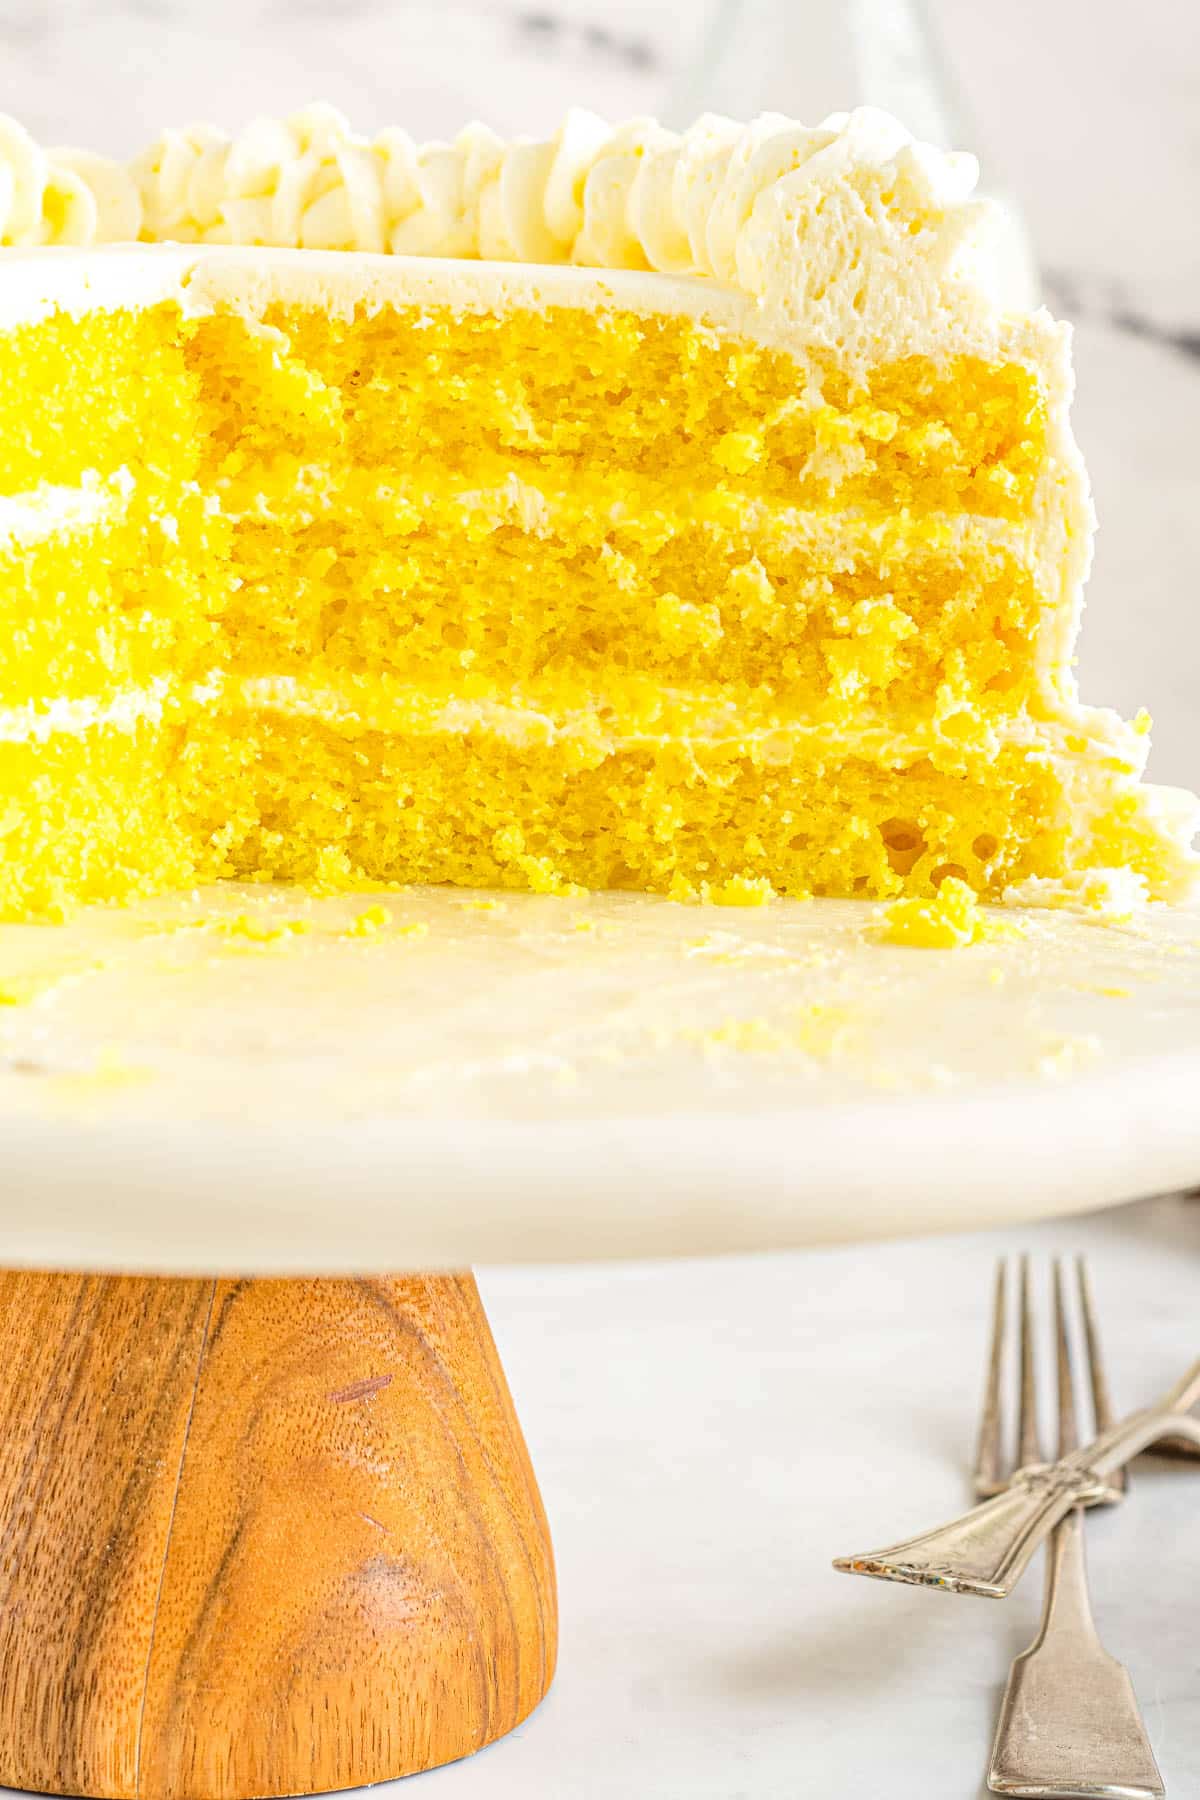 The recipe for Lemon Velvet Cake on a cake stand. The cake has been cut into so you can see all the layers.